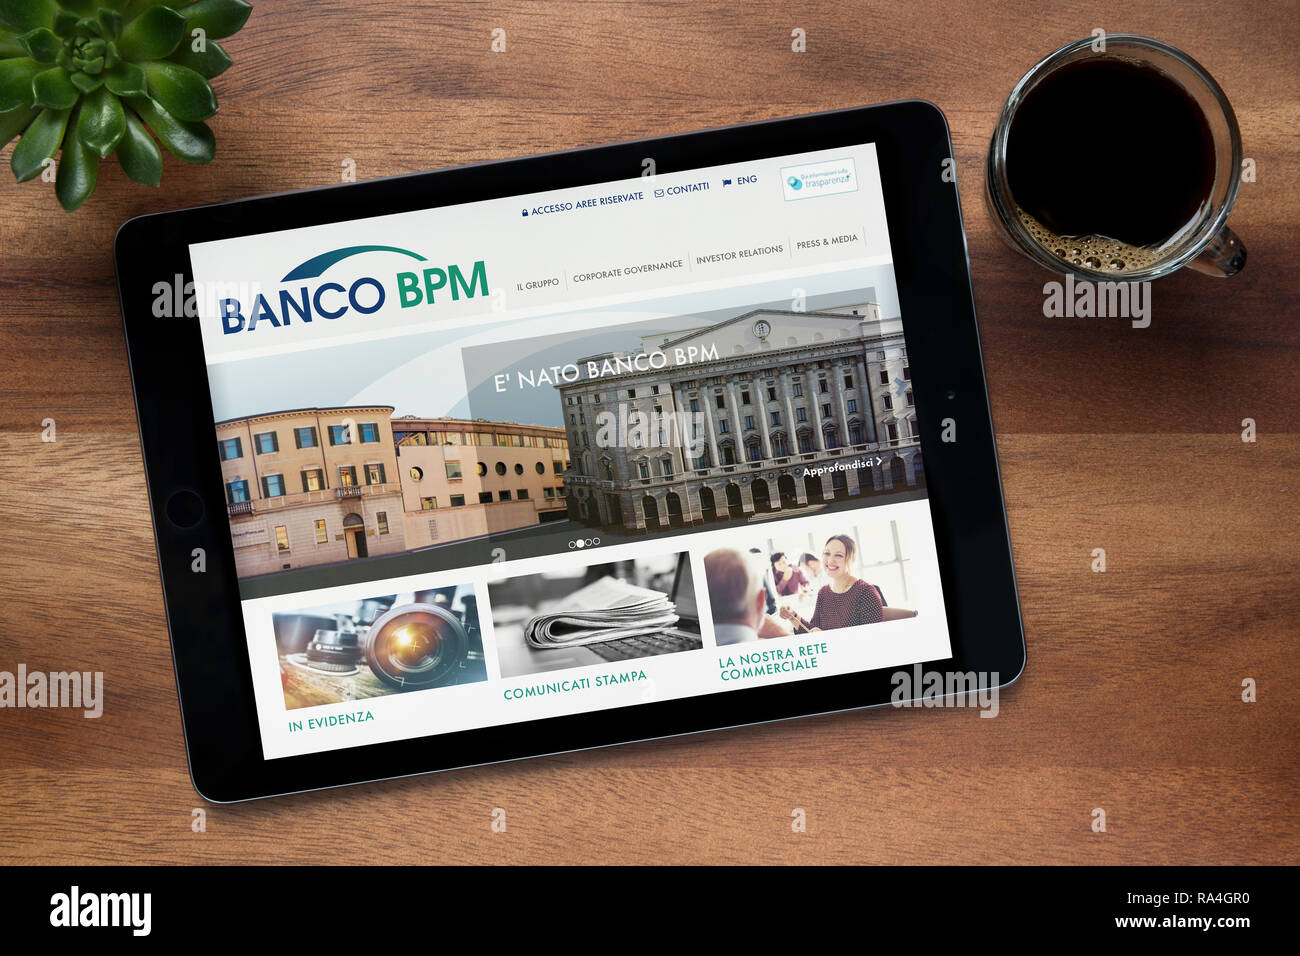 The website of Banco BPM Società per Azioni is seen on an iPad tablet, on a wooden table (Editorial use only). Stock Photo